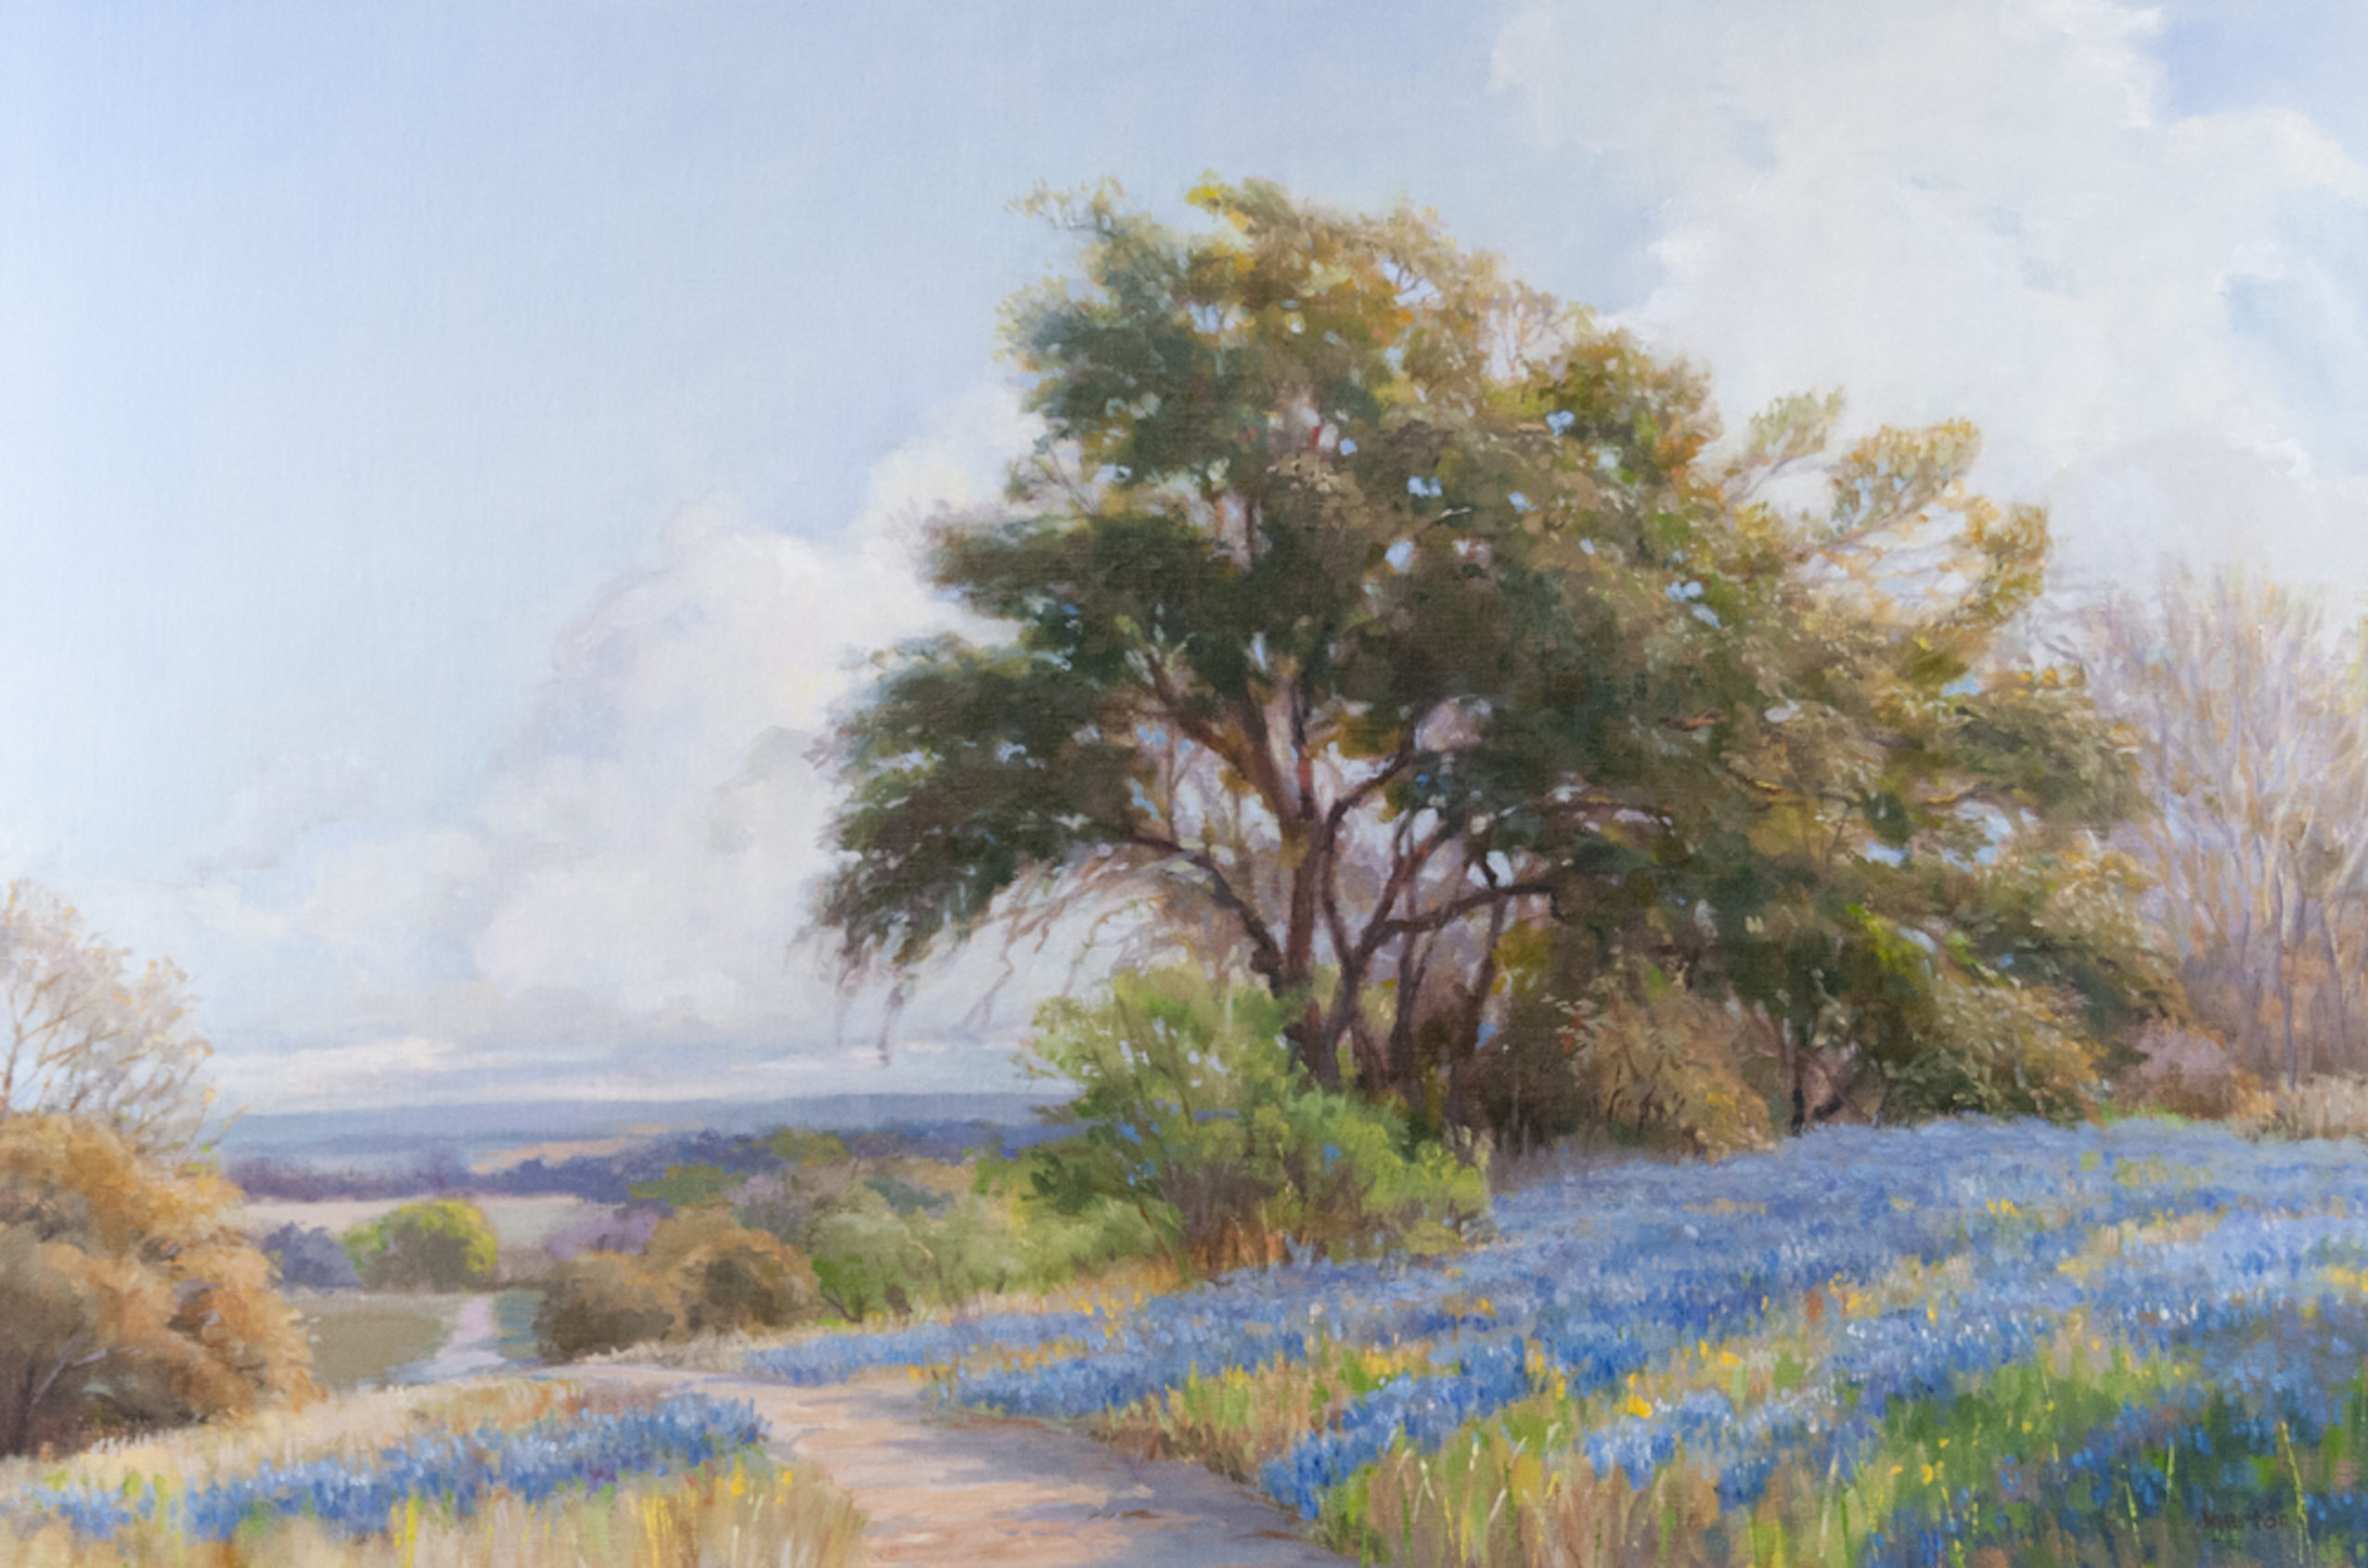 Lone Star State by Mallory Agerton, Oil, 24 x 36.; Gallery 330